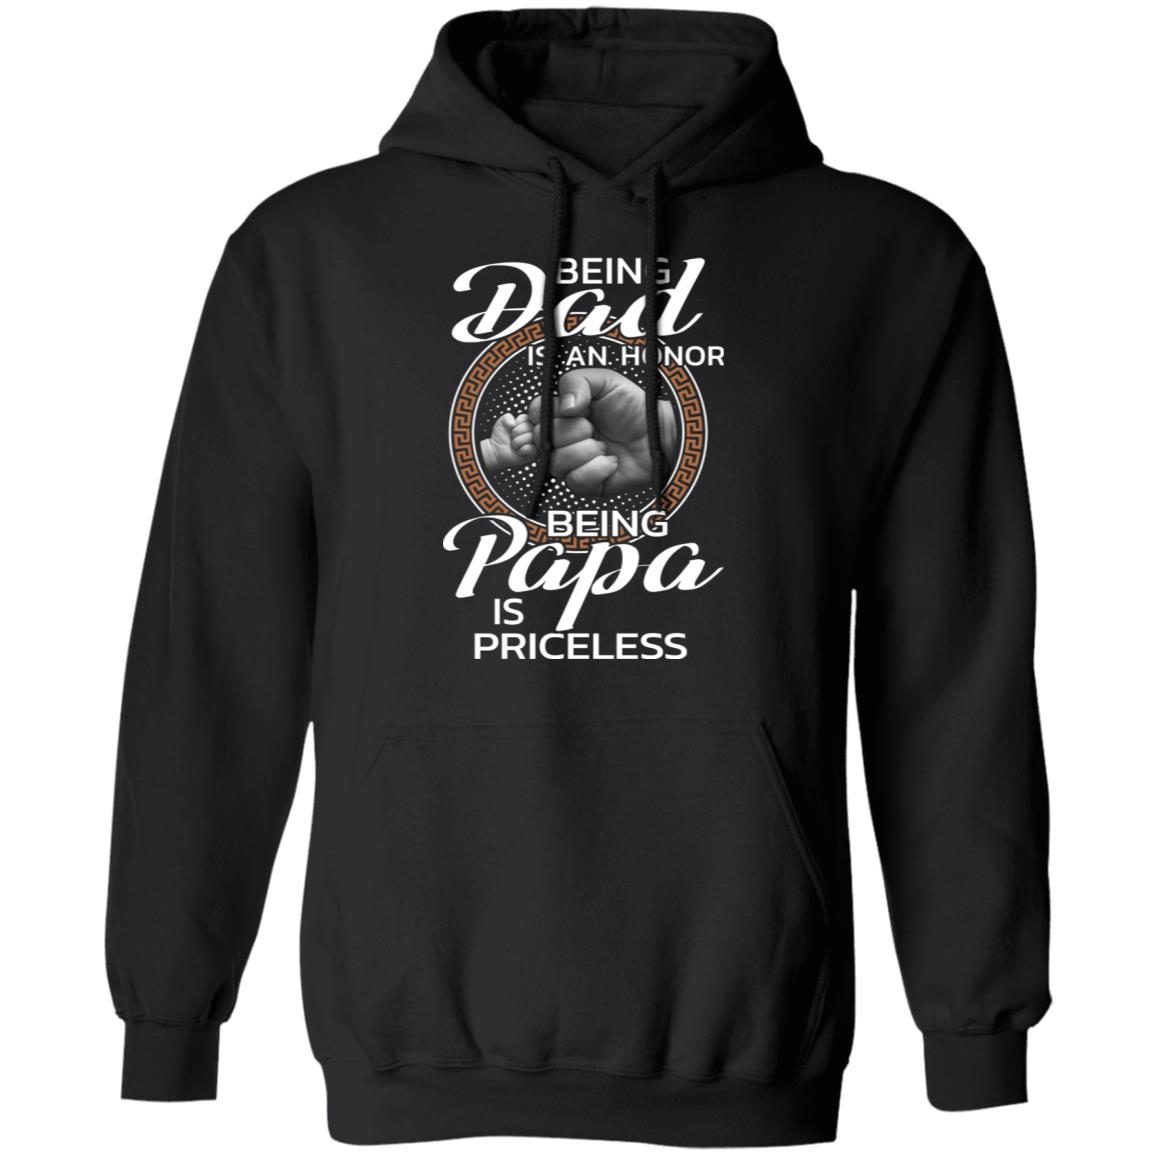 Being Dad is An Honor Being Papa is Priceless shirt